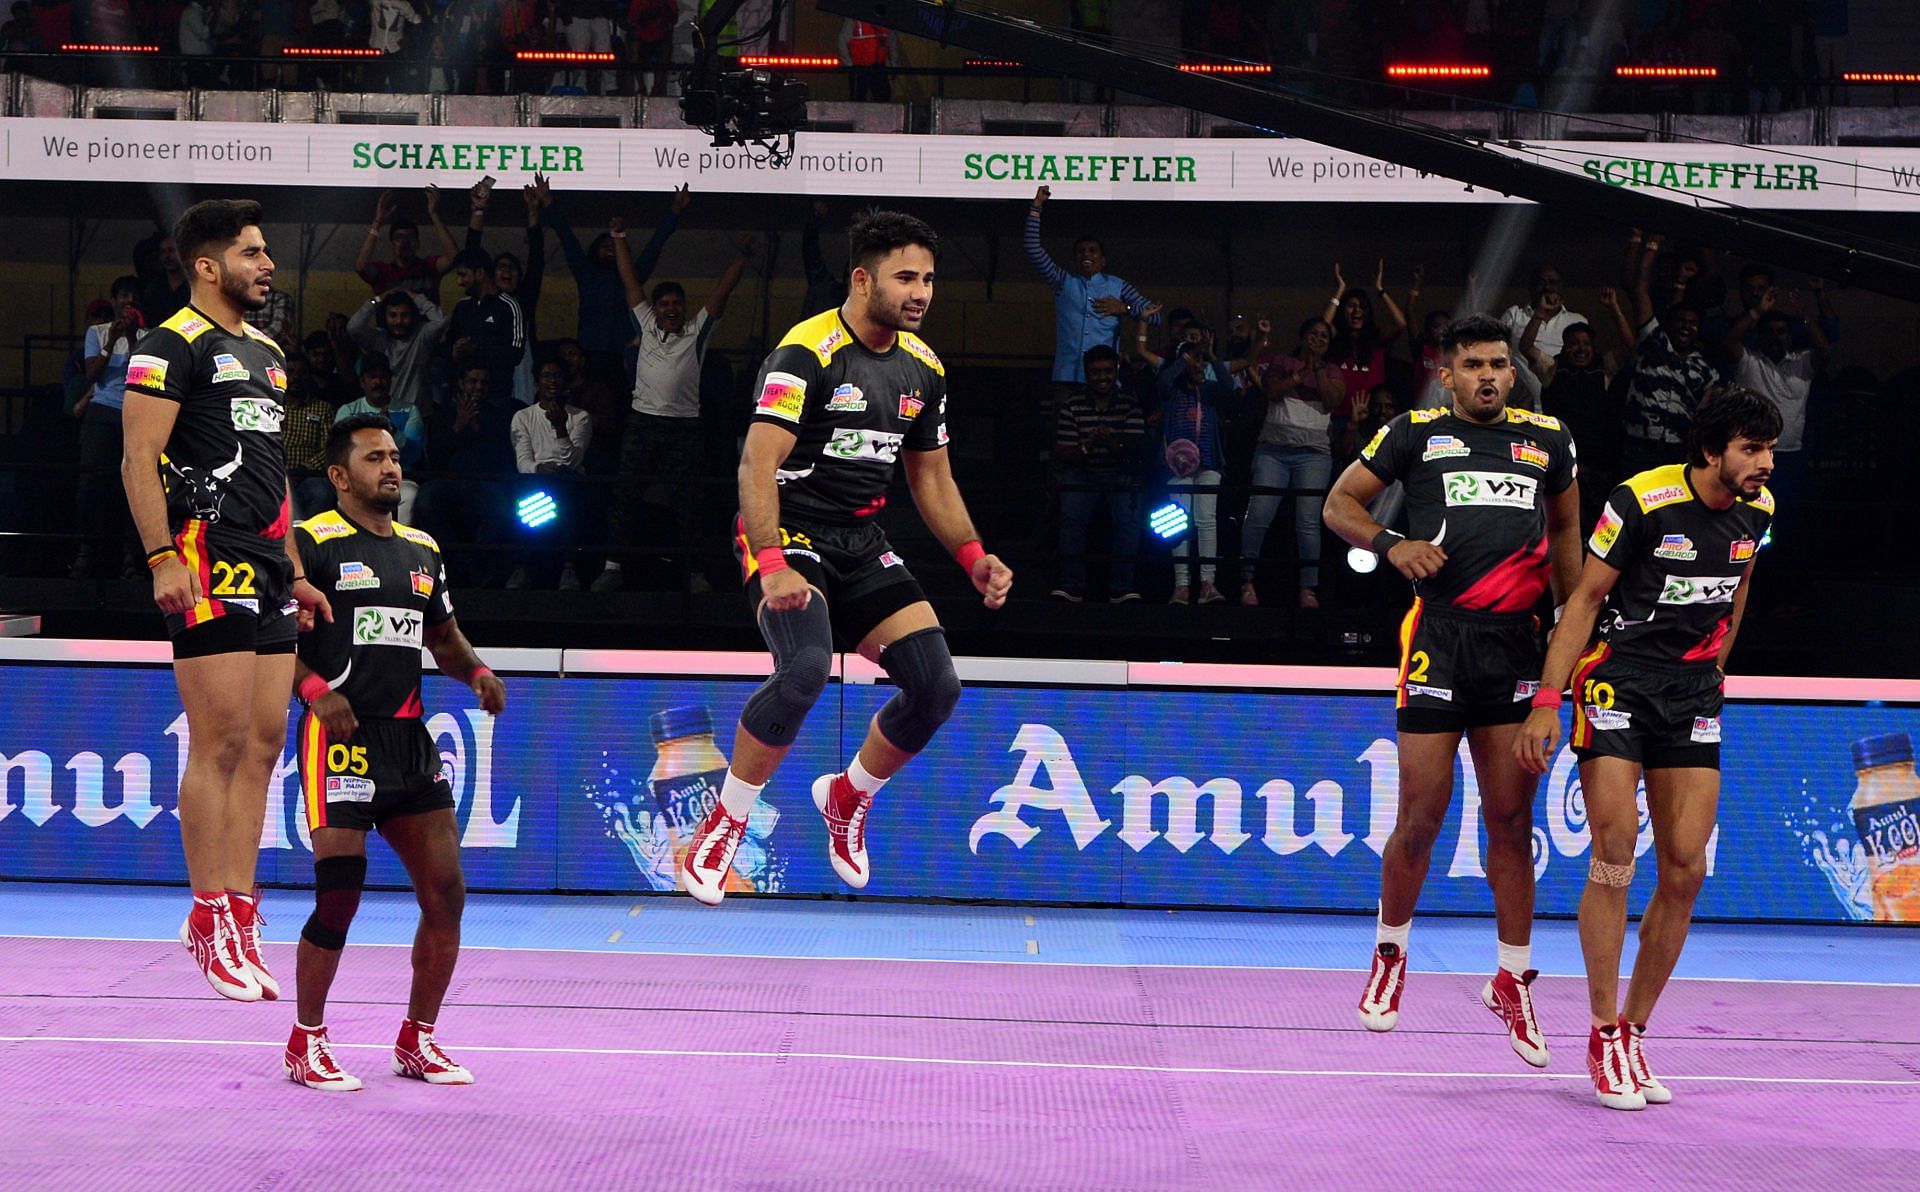 Bengaluru Bulls are one of the 6 teams in the PKL playoffs (Image: PKL)